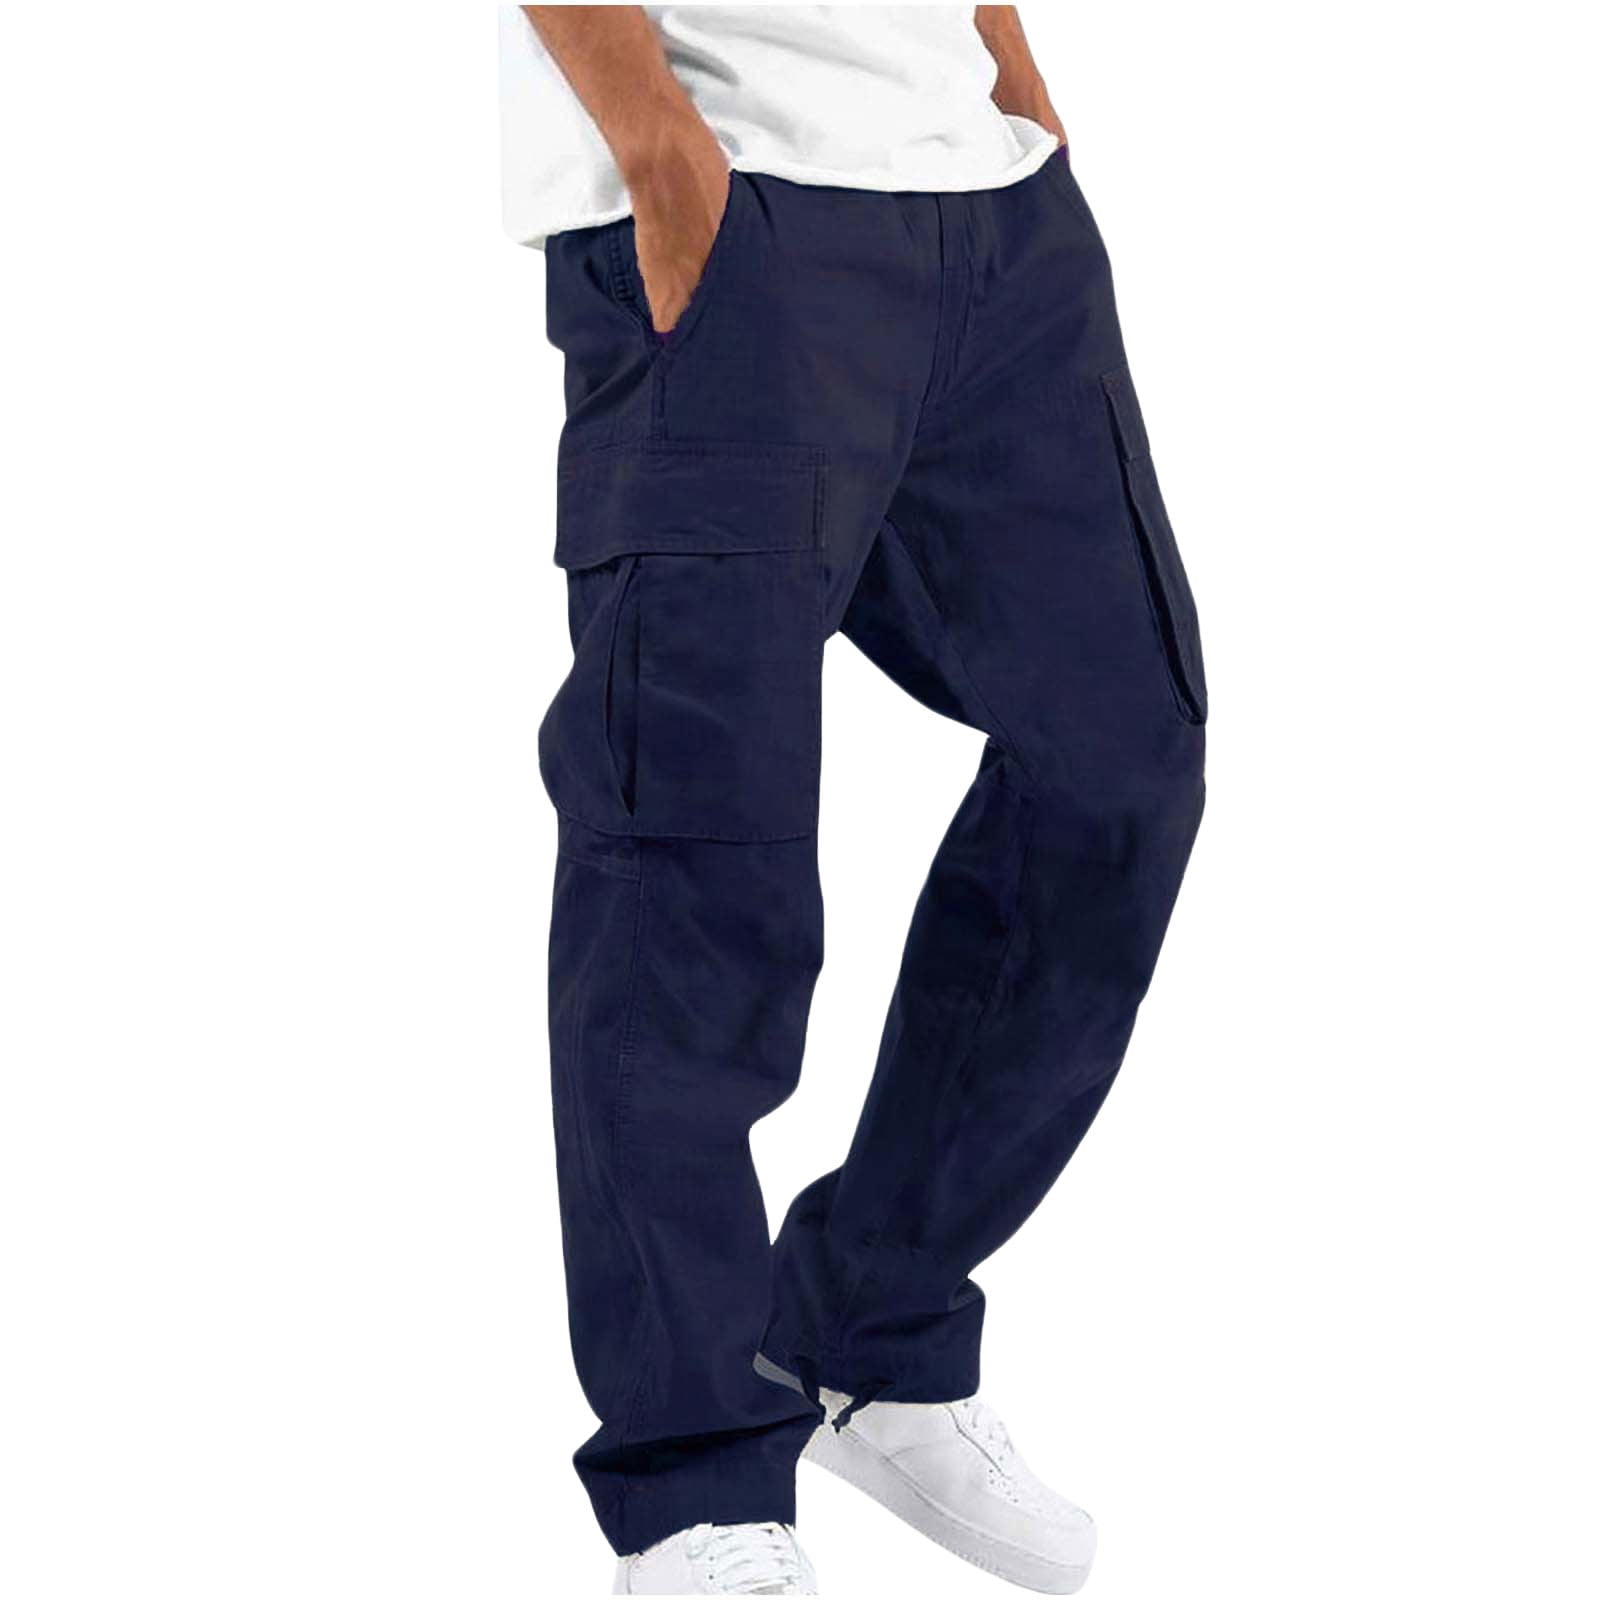 XFLWAM Men's Athletic-Fit Cargo Pants Casual Regular Straight Stretch Twill  Pant Black 5XL